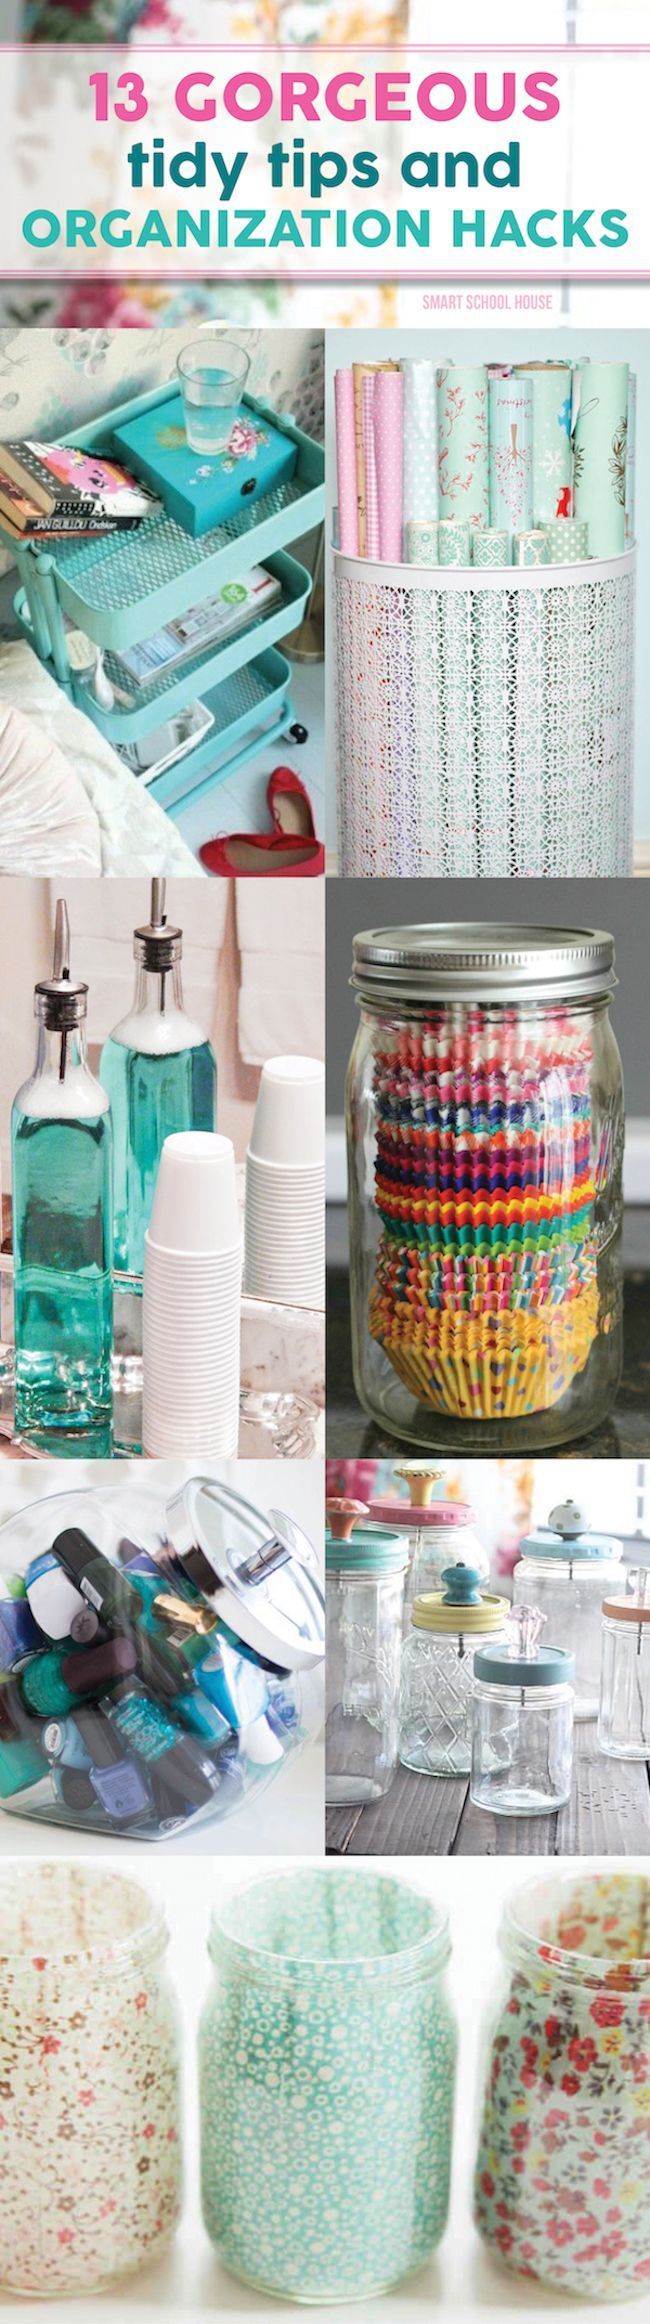 Gorgeous Tidy Tips and Organization Hacks. DIY home and house life hacks and tips that are just perfect for your space!